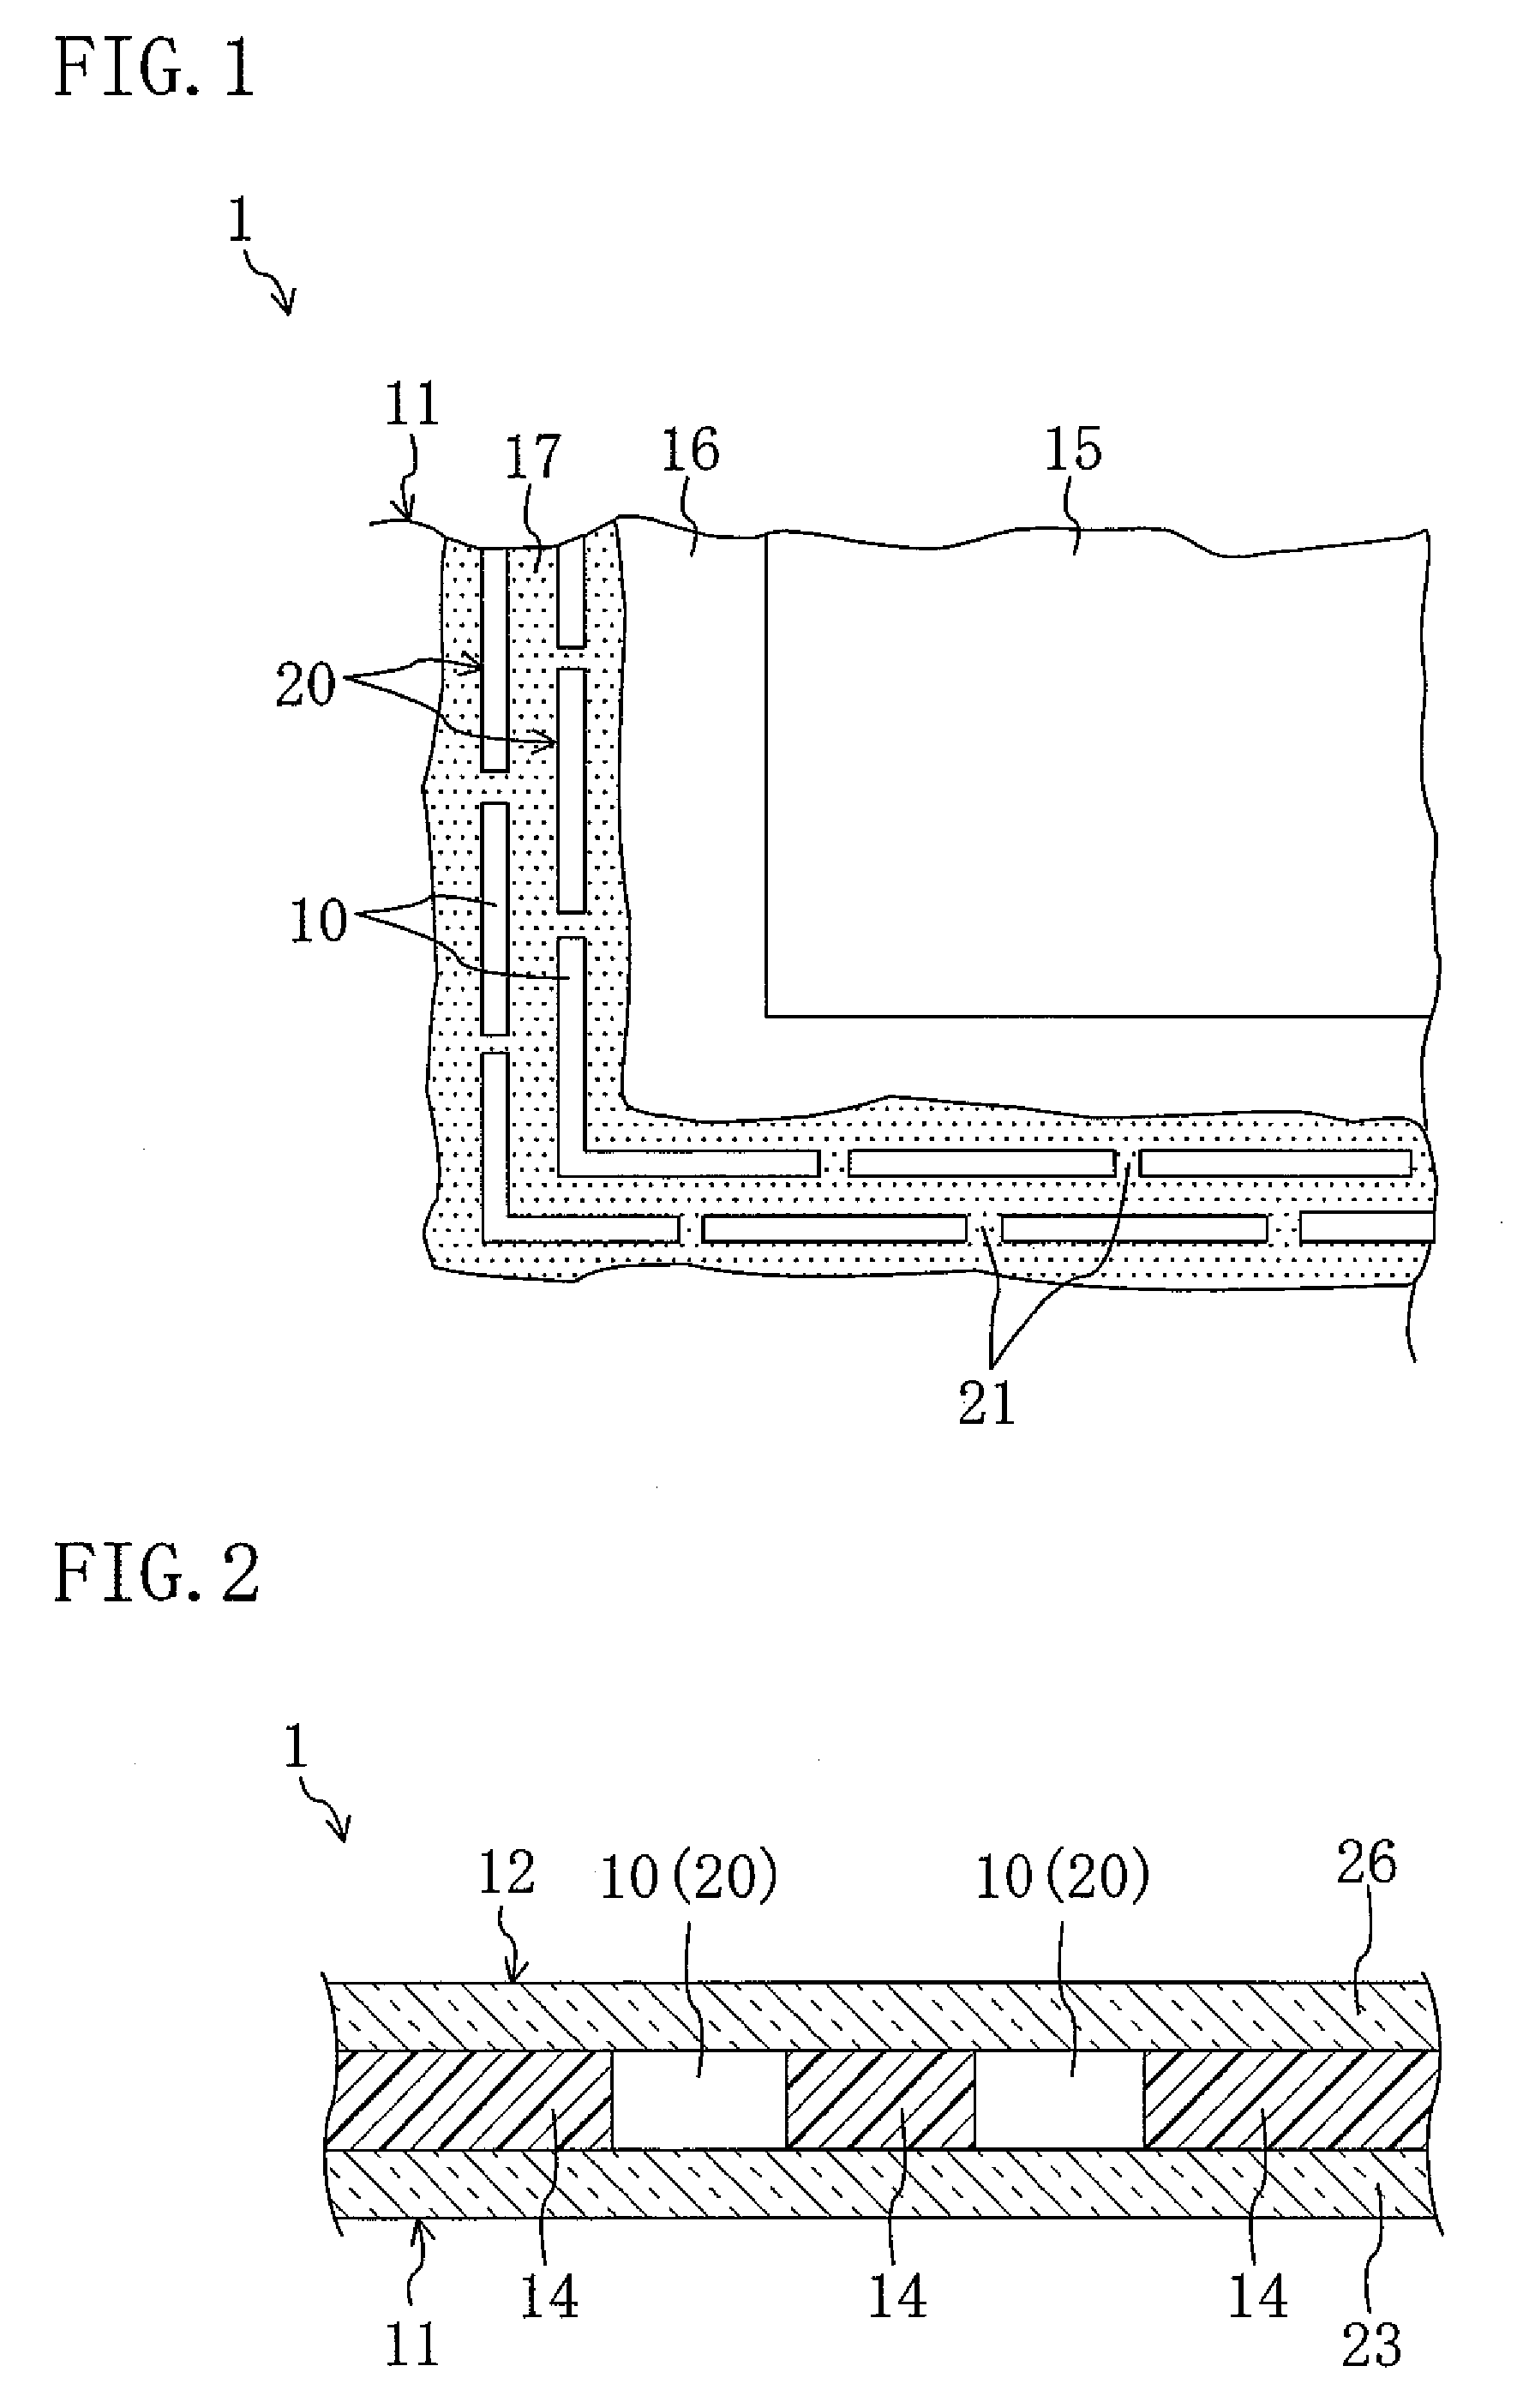 Display comprising a plurality of spacer rows having first and second protruding portions and method of manufacturing the same